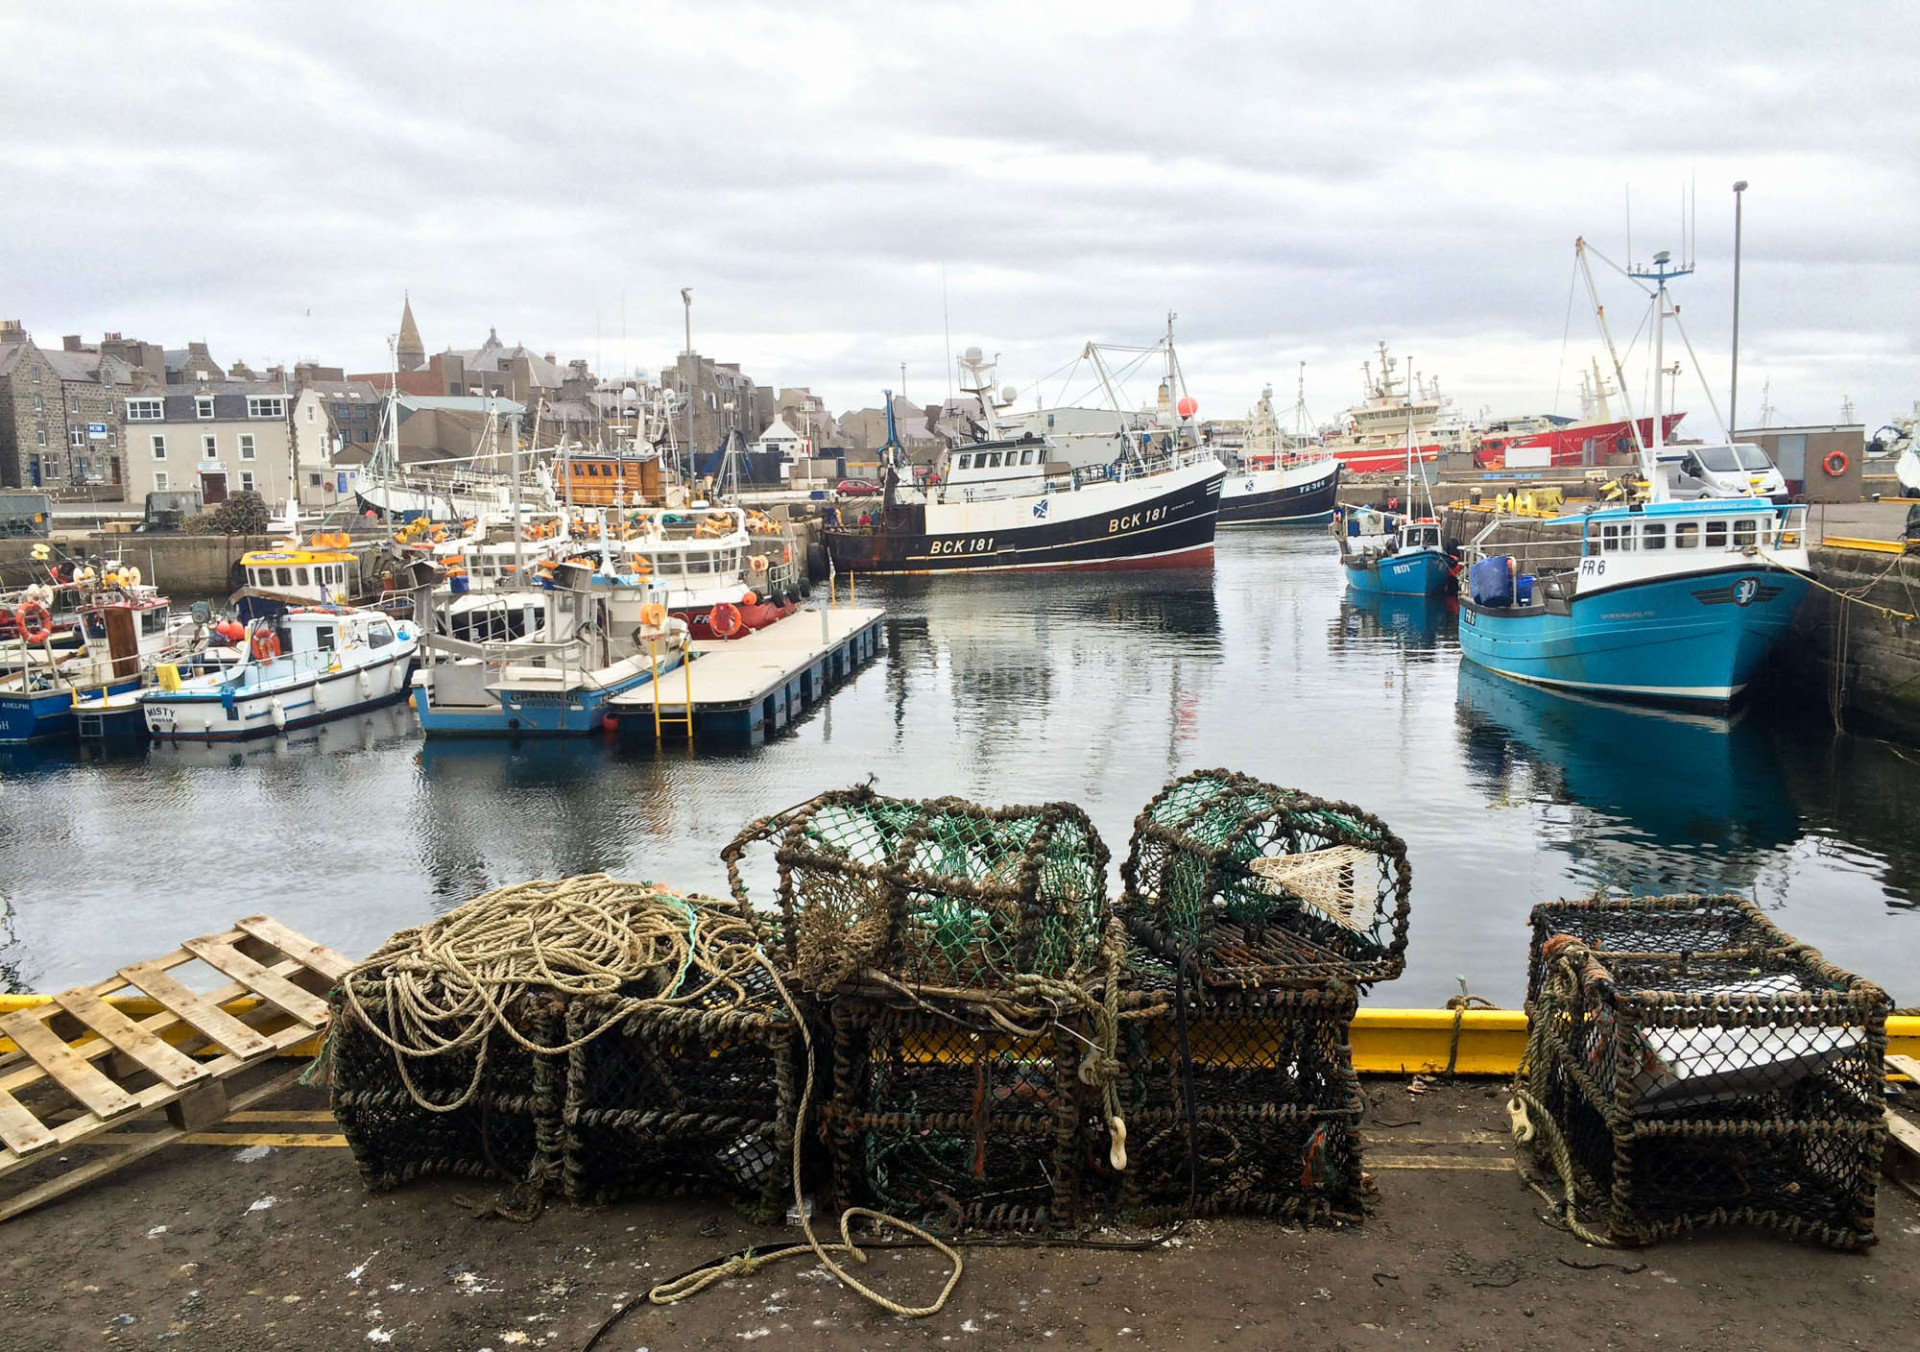 A view of the fishing port in Fraserburgh, Scotland. A decade ago, fishermen trying to catch cod were coming up empty. Now the cod and hake catch is rebounding.